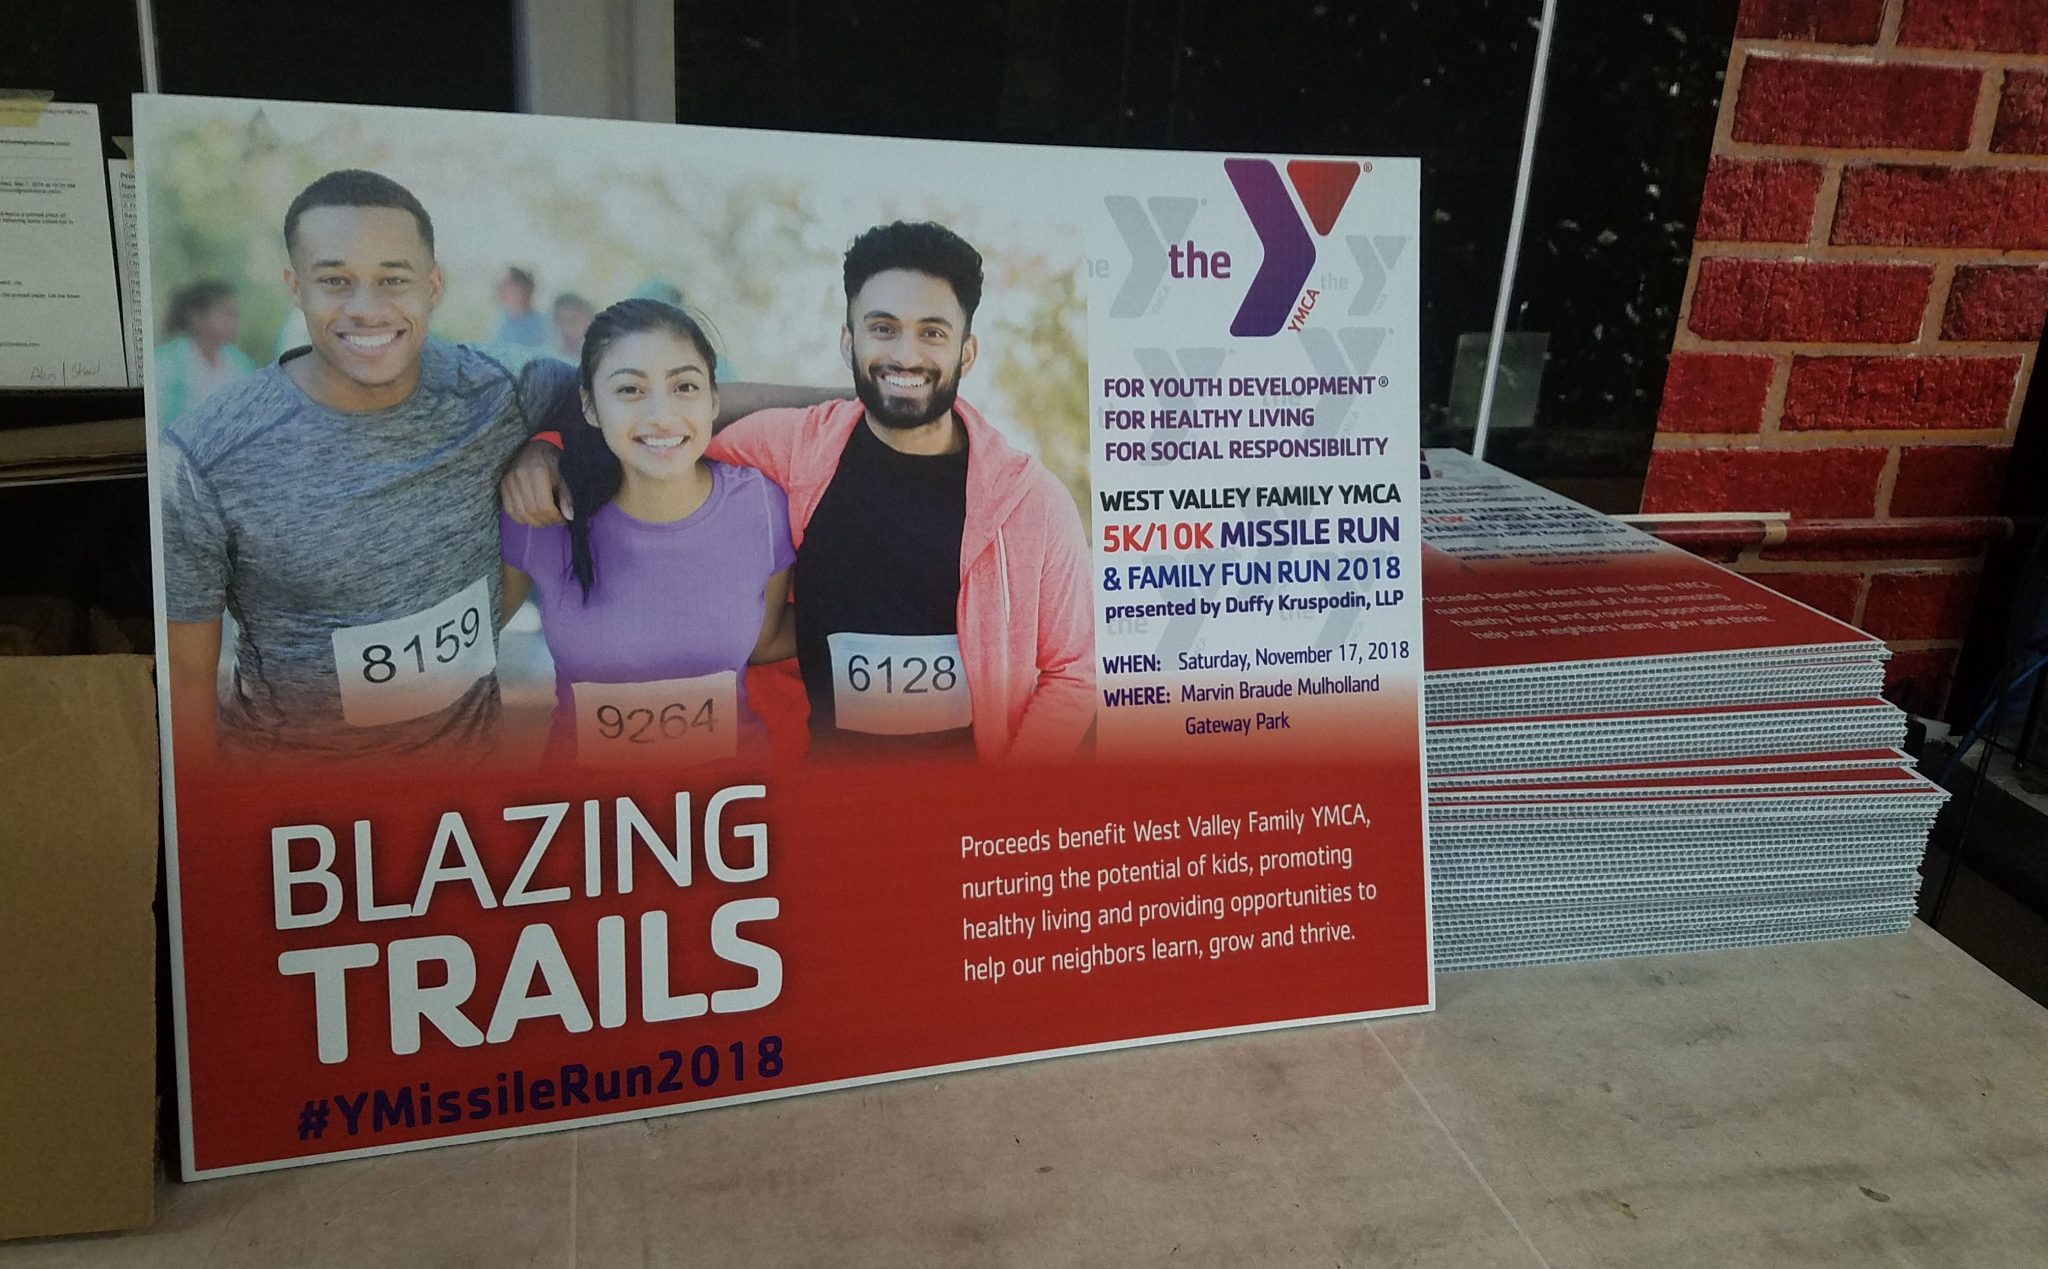 You are currently viewing Yard Signs for the West Valley Family YMCA 5/10K Missile Run in Tarzana